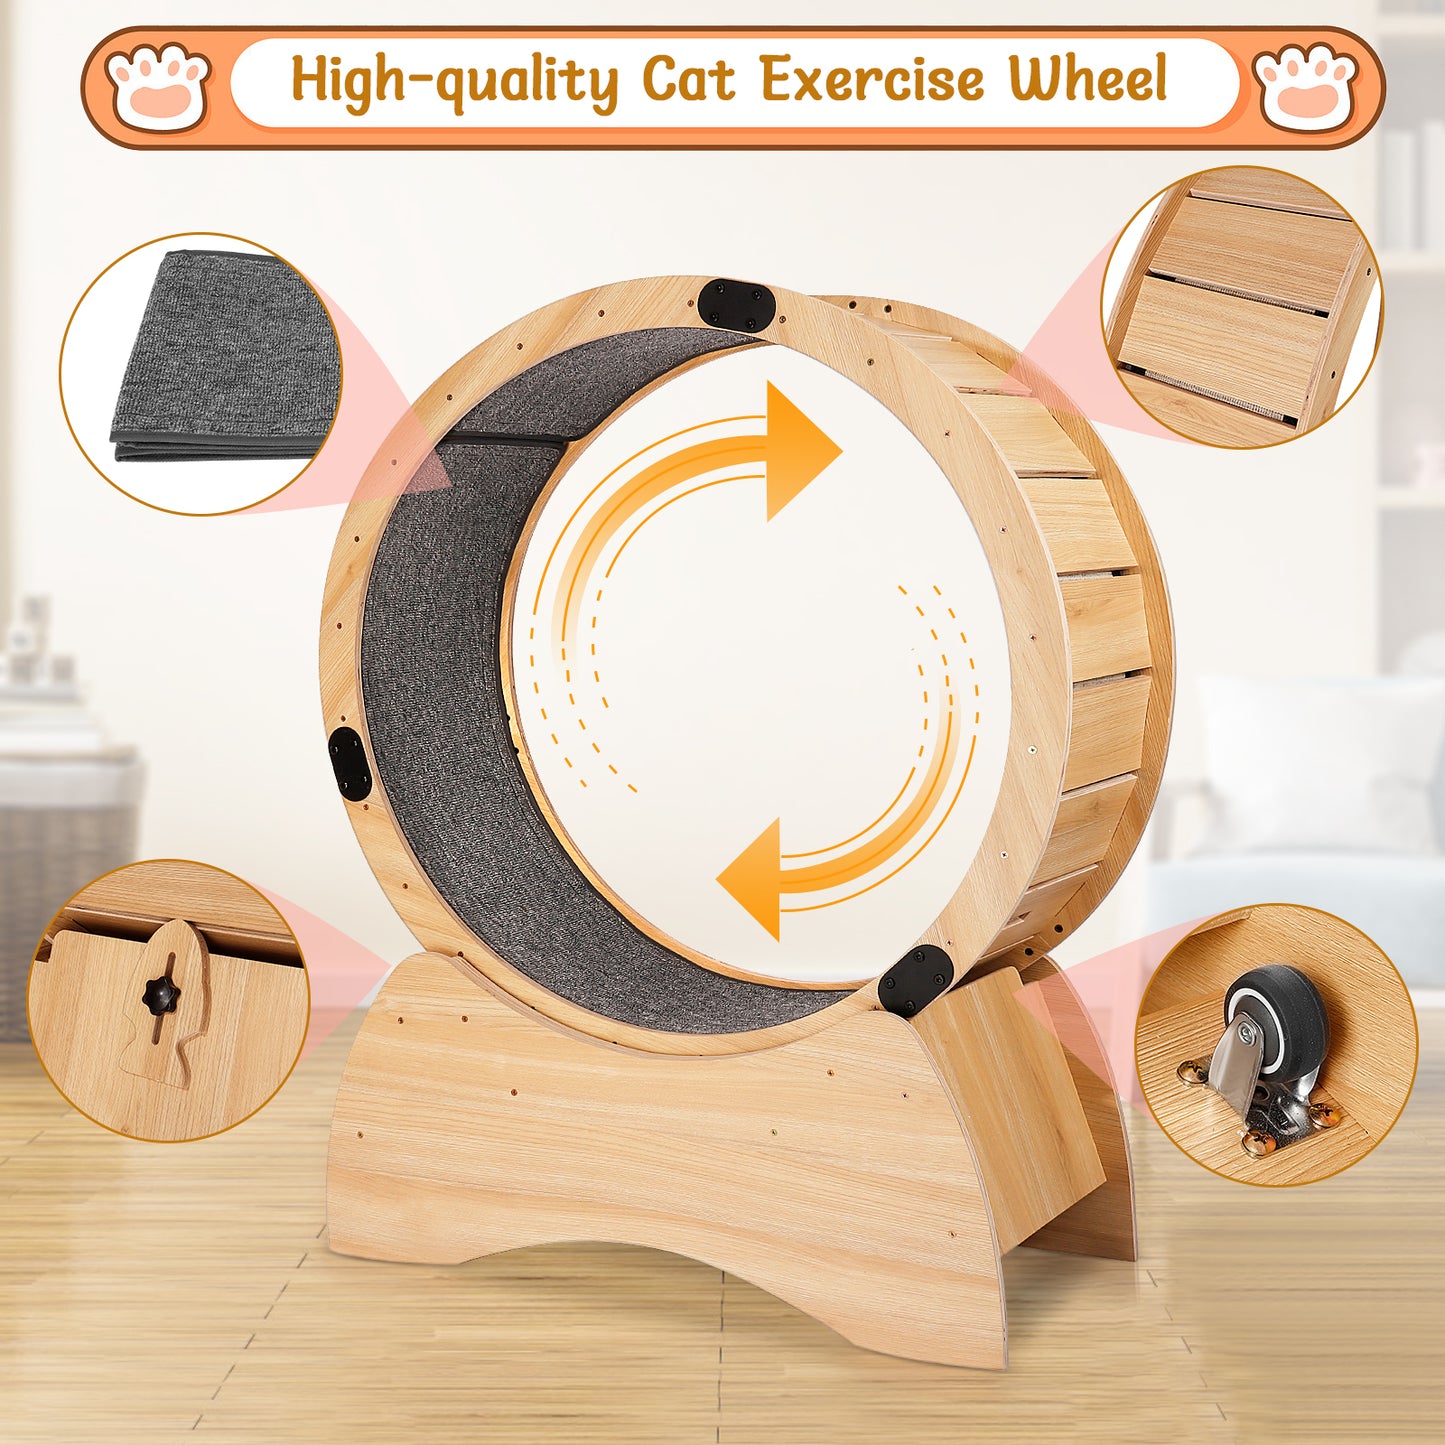 Algherohein Fun Cat Exercise Wheel, Cat Treadmill with Carpeted,Interactive Cat Toys Gifts,Brown